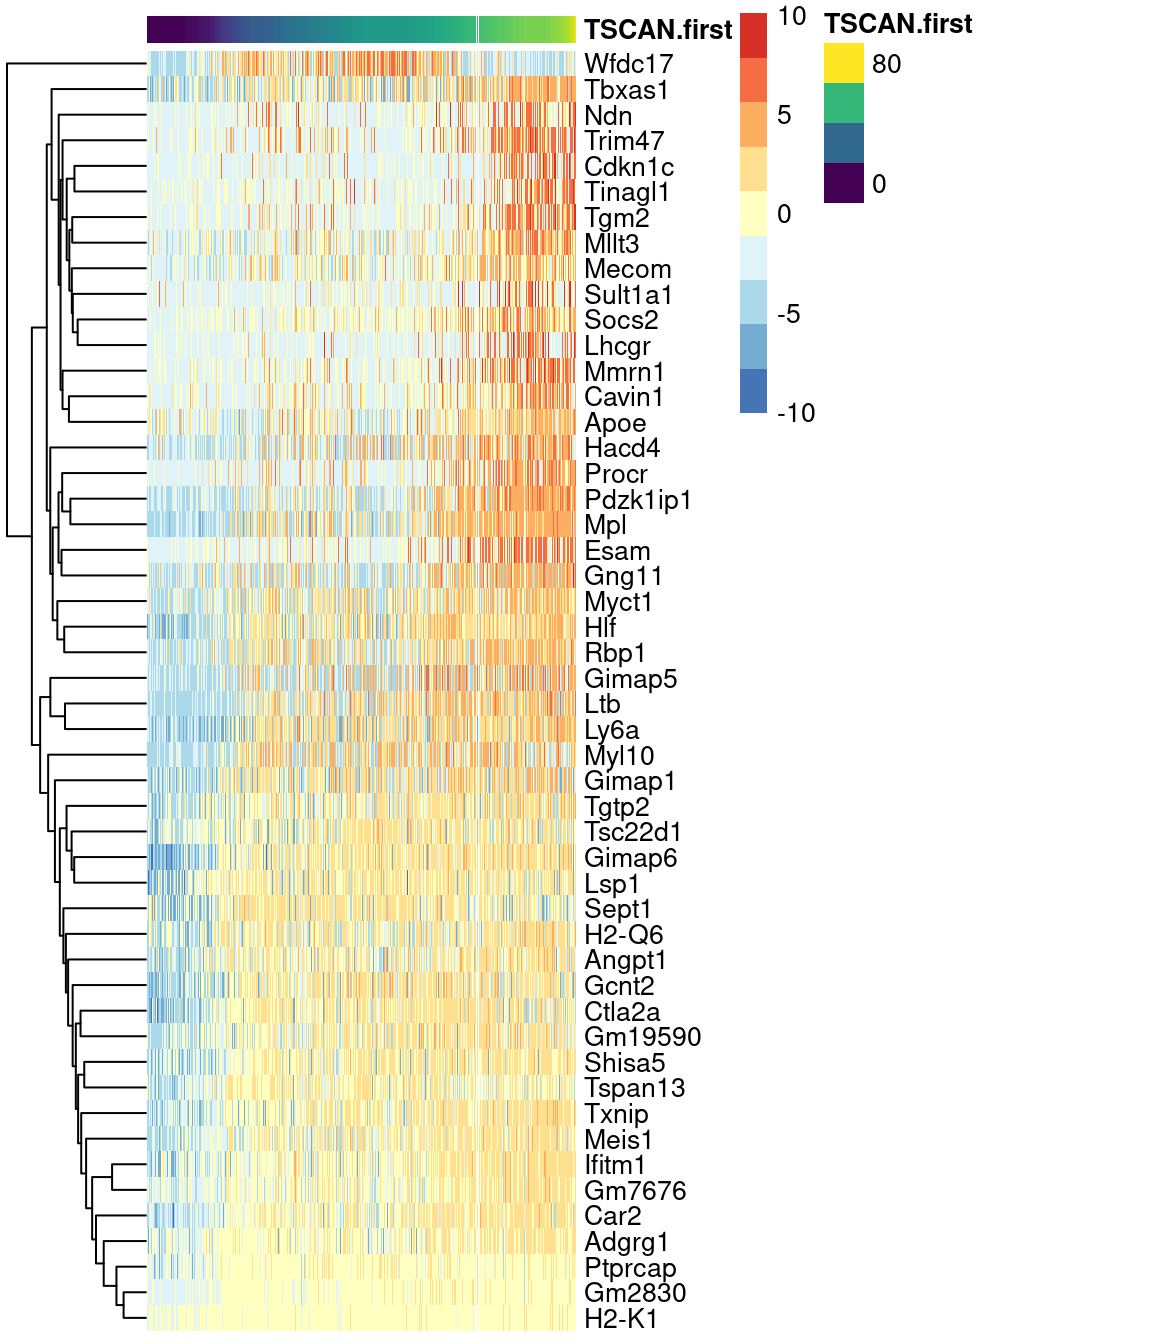 Heatmap of the expression of the top 50 genes that increase in expression with increasing pseudotime along the first path in the MST of the Nestorowa HSC dataset. Each column represents a cell that is mapped to this path and is ordered by its pseudotime value.